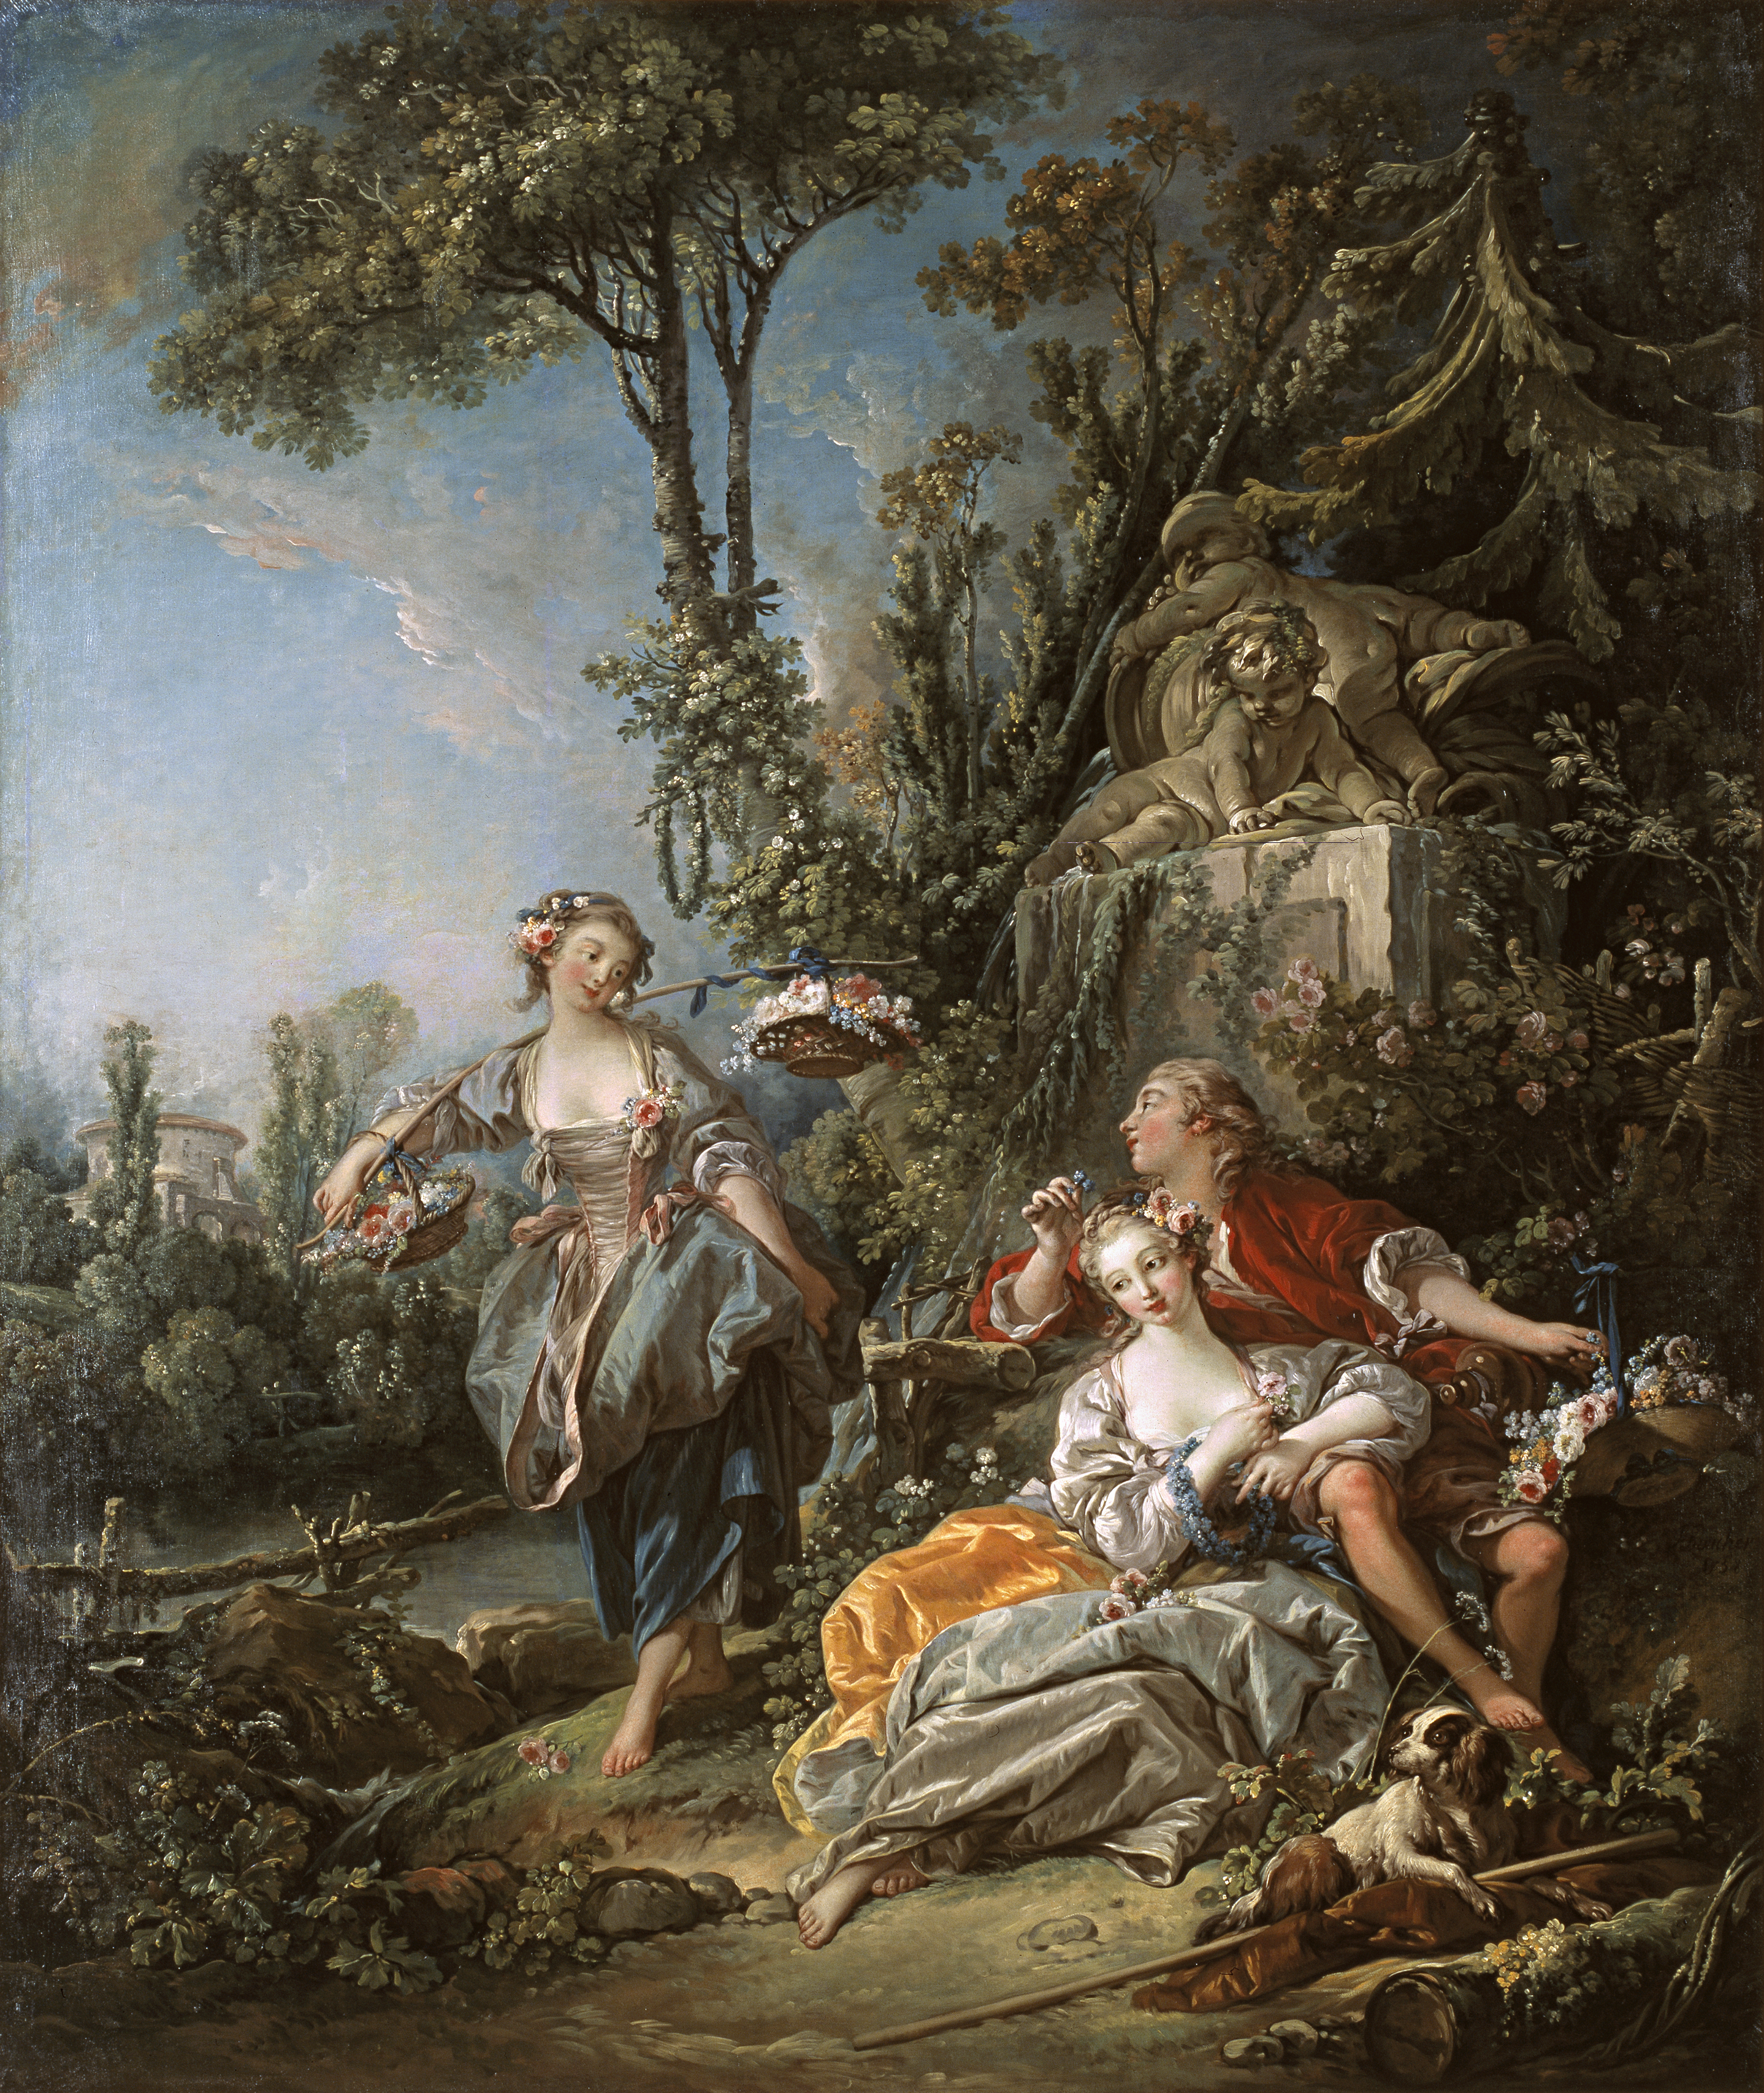 Painting, Lovers in a Park by Boucher depicts a pastoral scnee